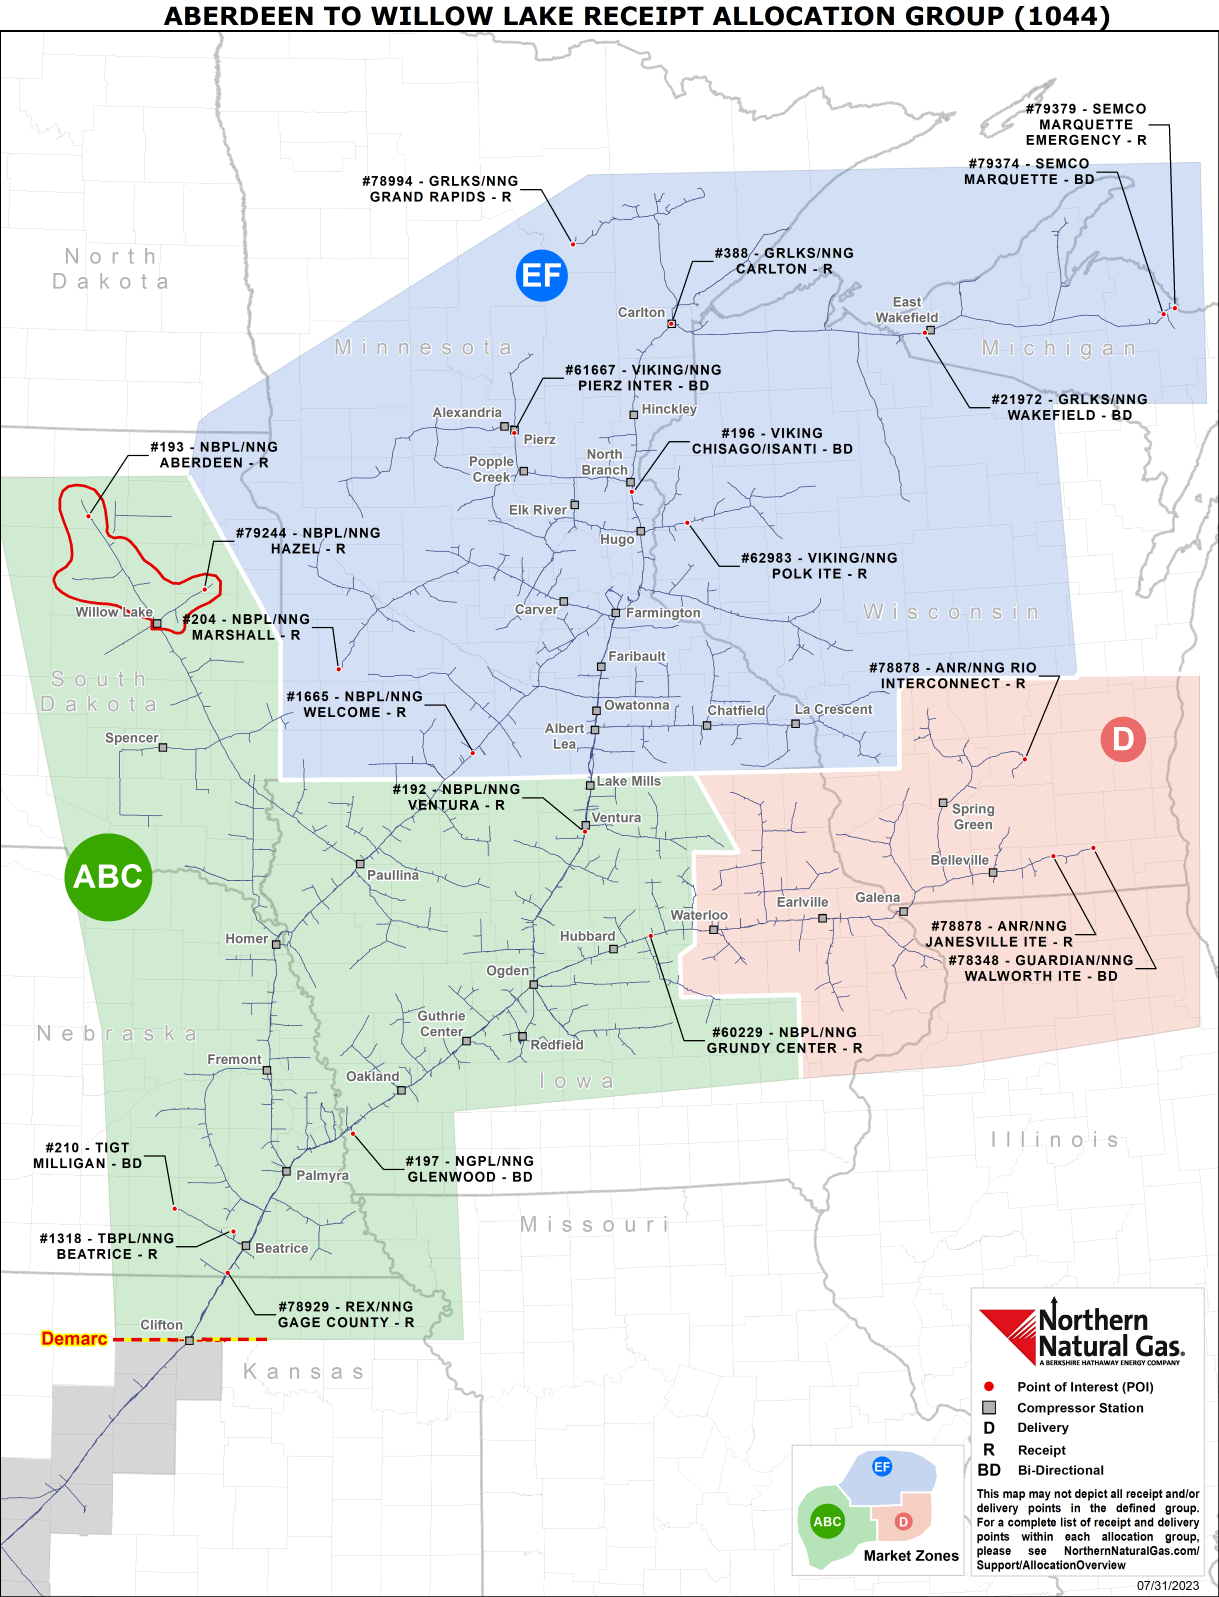 (1044) Aberdeen to Willow Lake Allocation Group Map